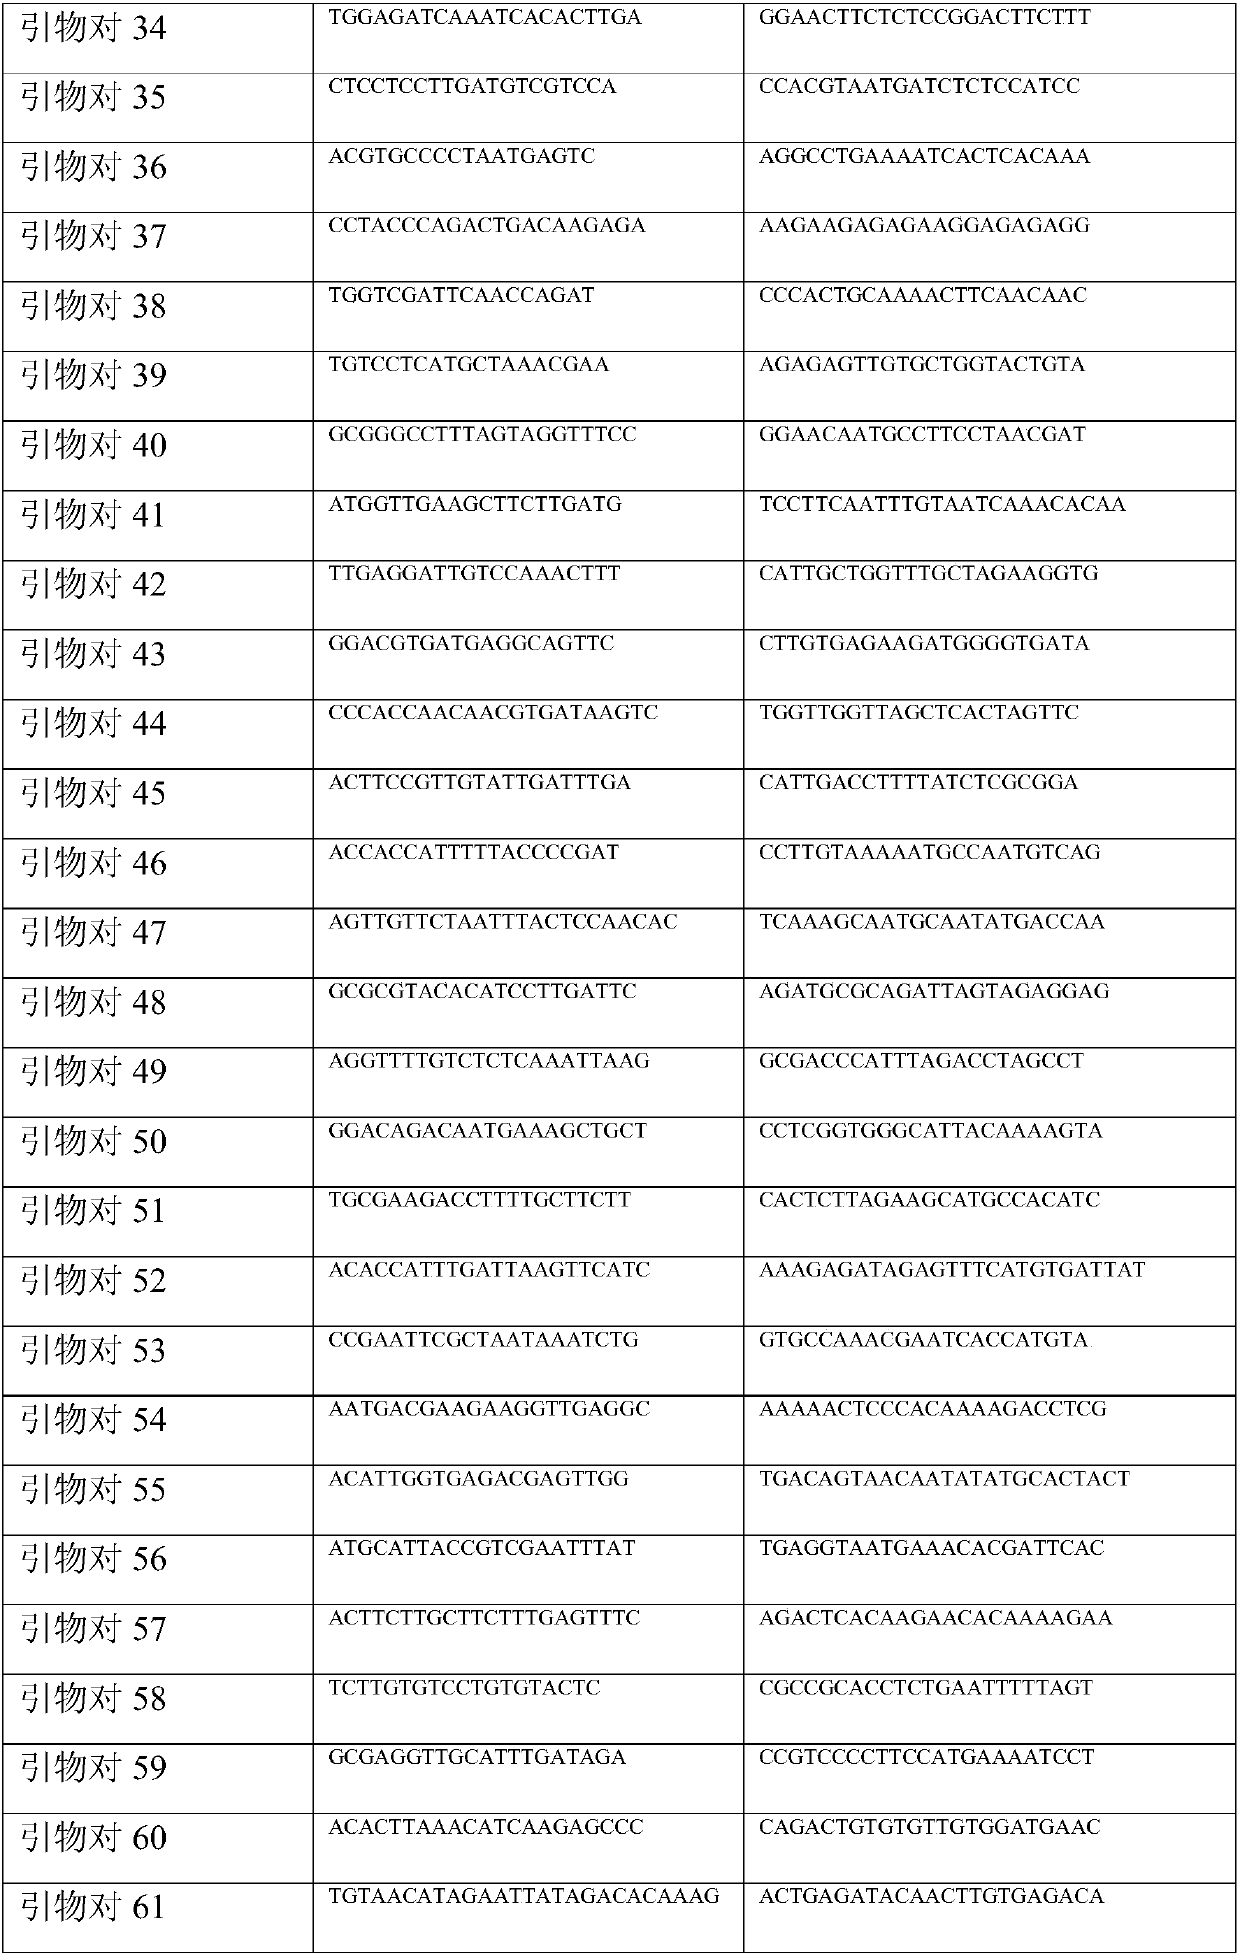 Single nucleotide polymorphism based primer set for hybrid identification of true and false peanuts and identification method thereof